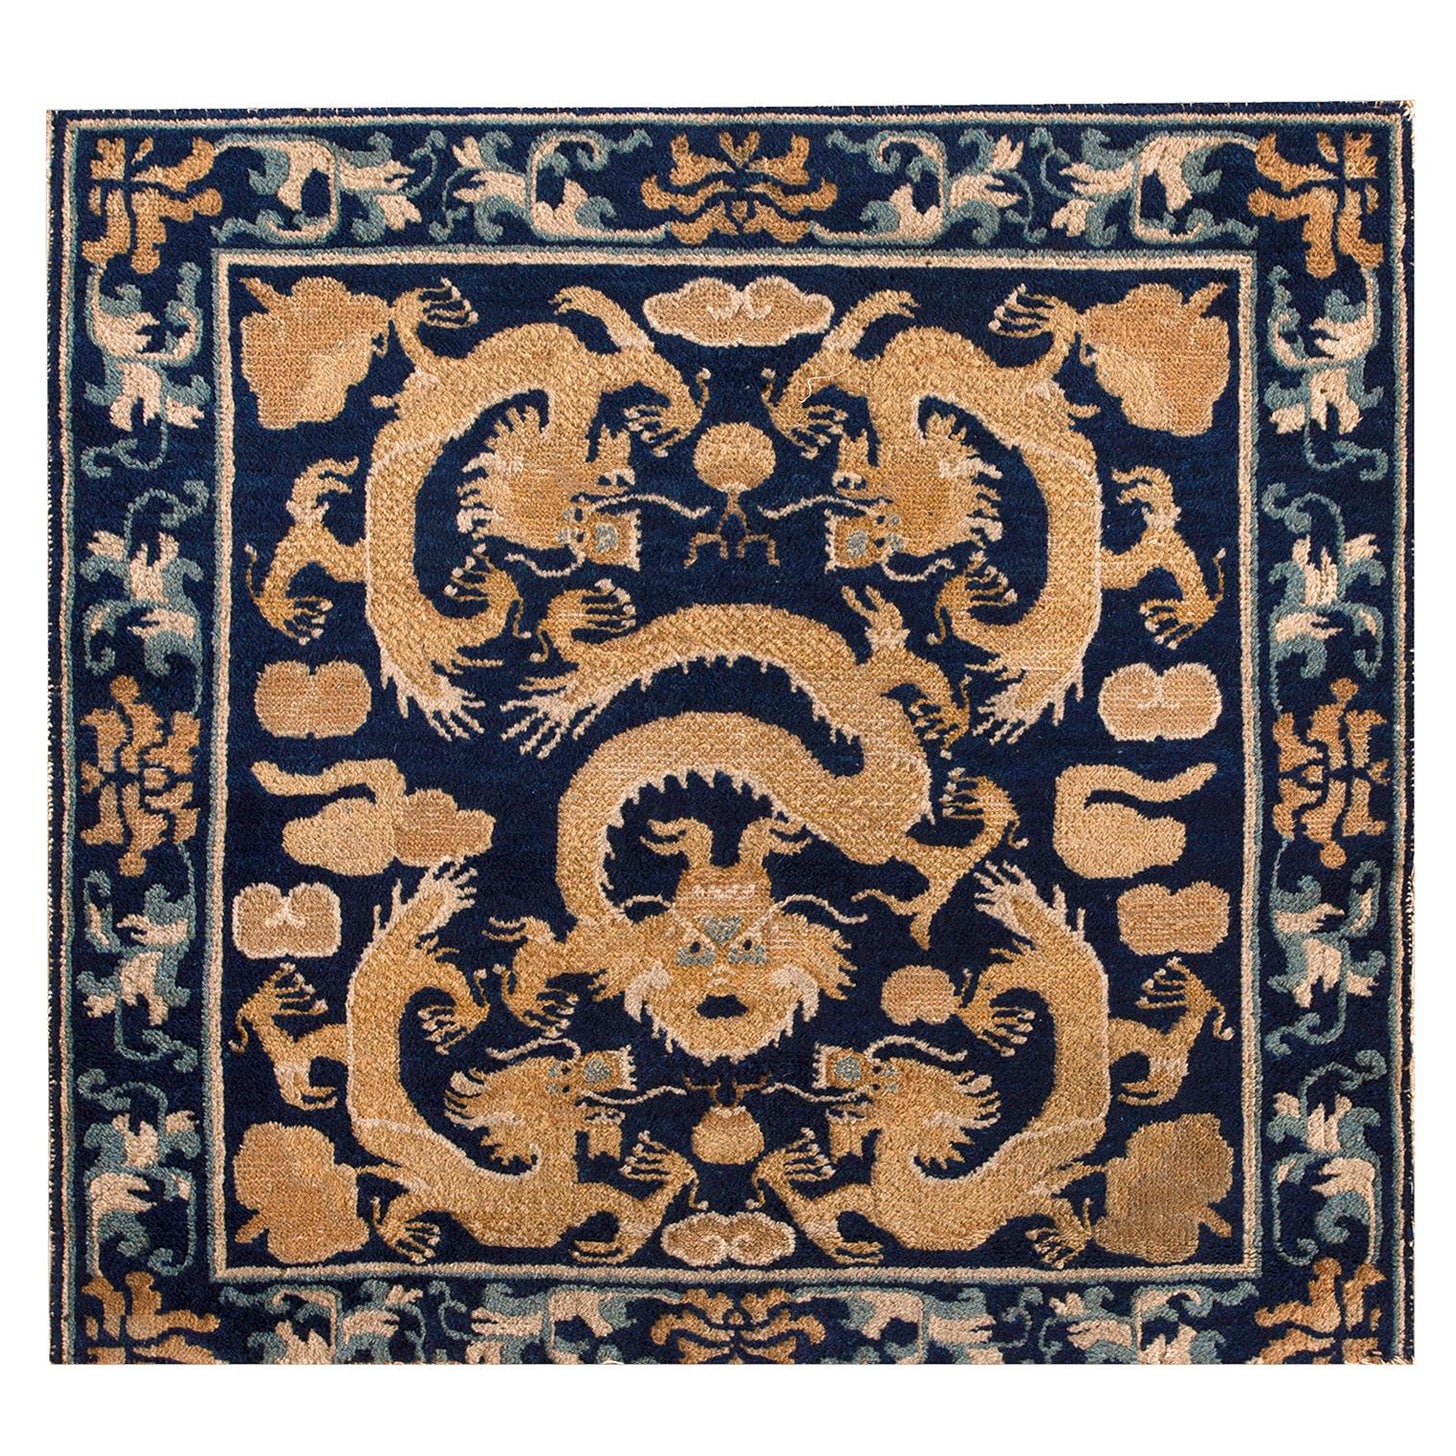 Antique Chinese Ningxia Rug 2' 9" x 2' 11" For Sale